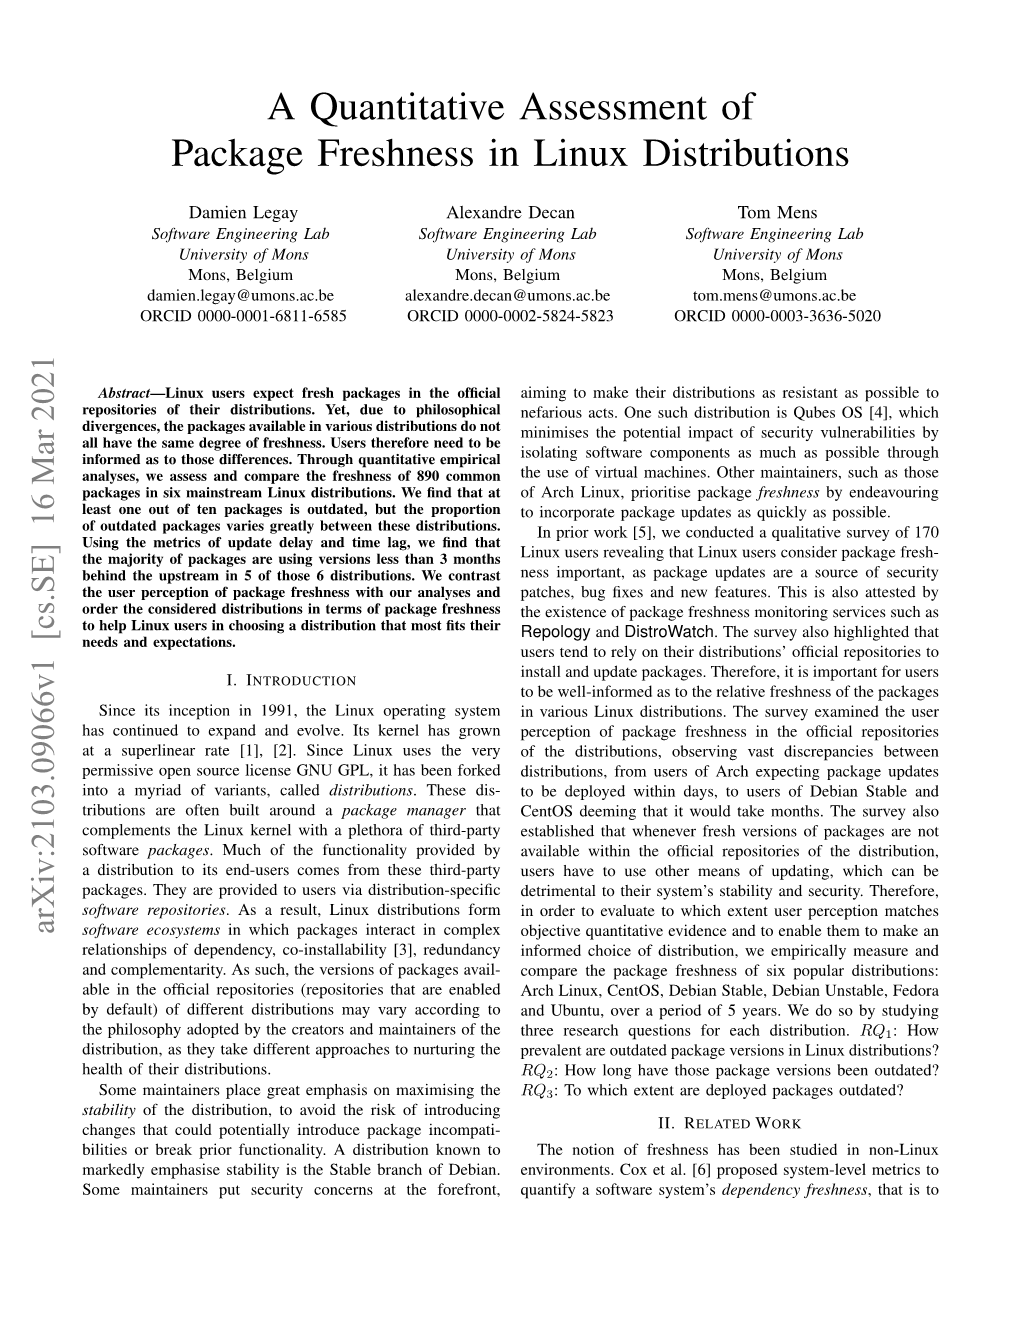 A Quantitative Assessment of Package Freshness in Linux Distributions